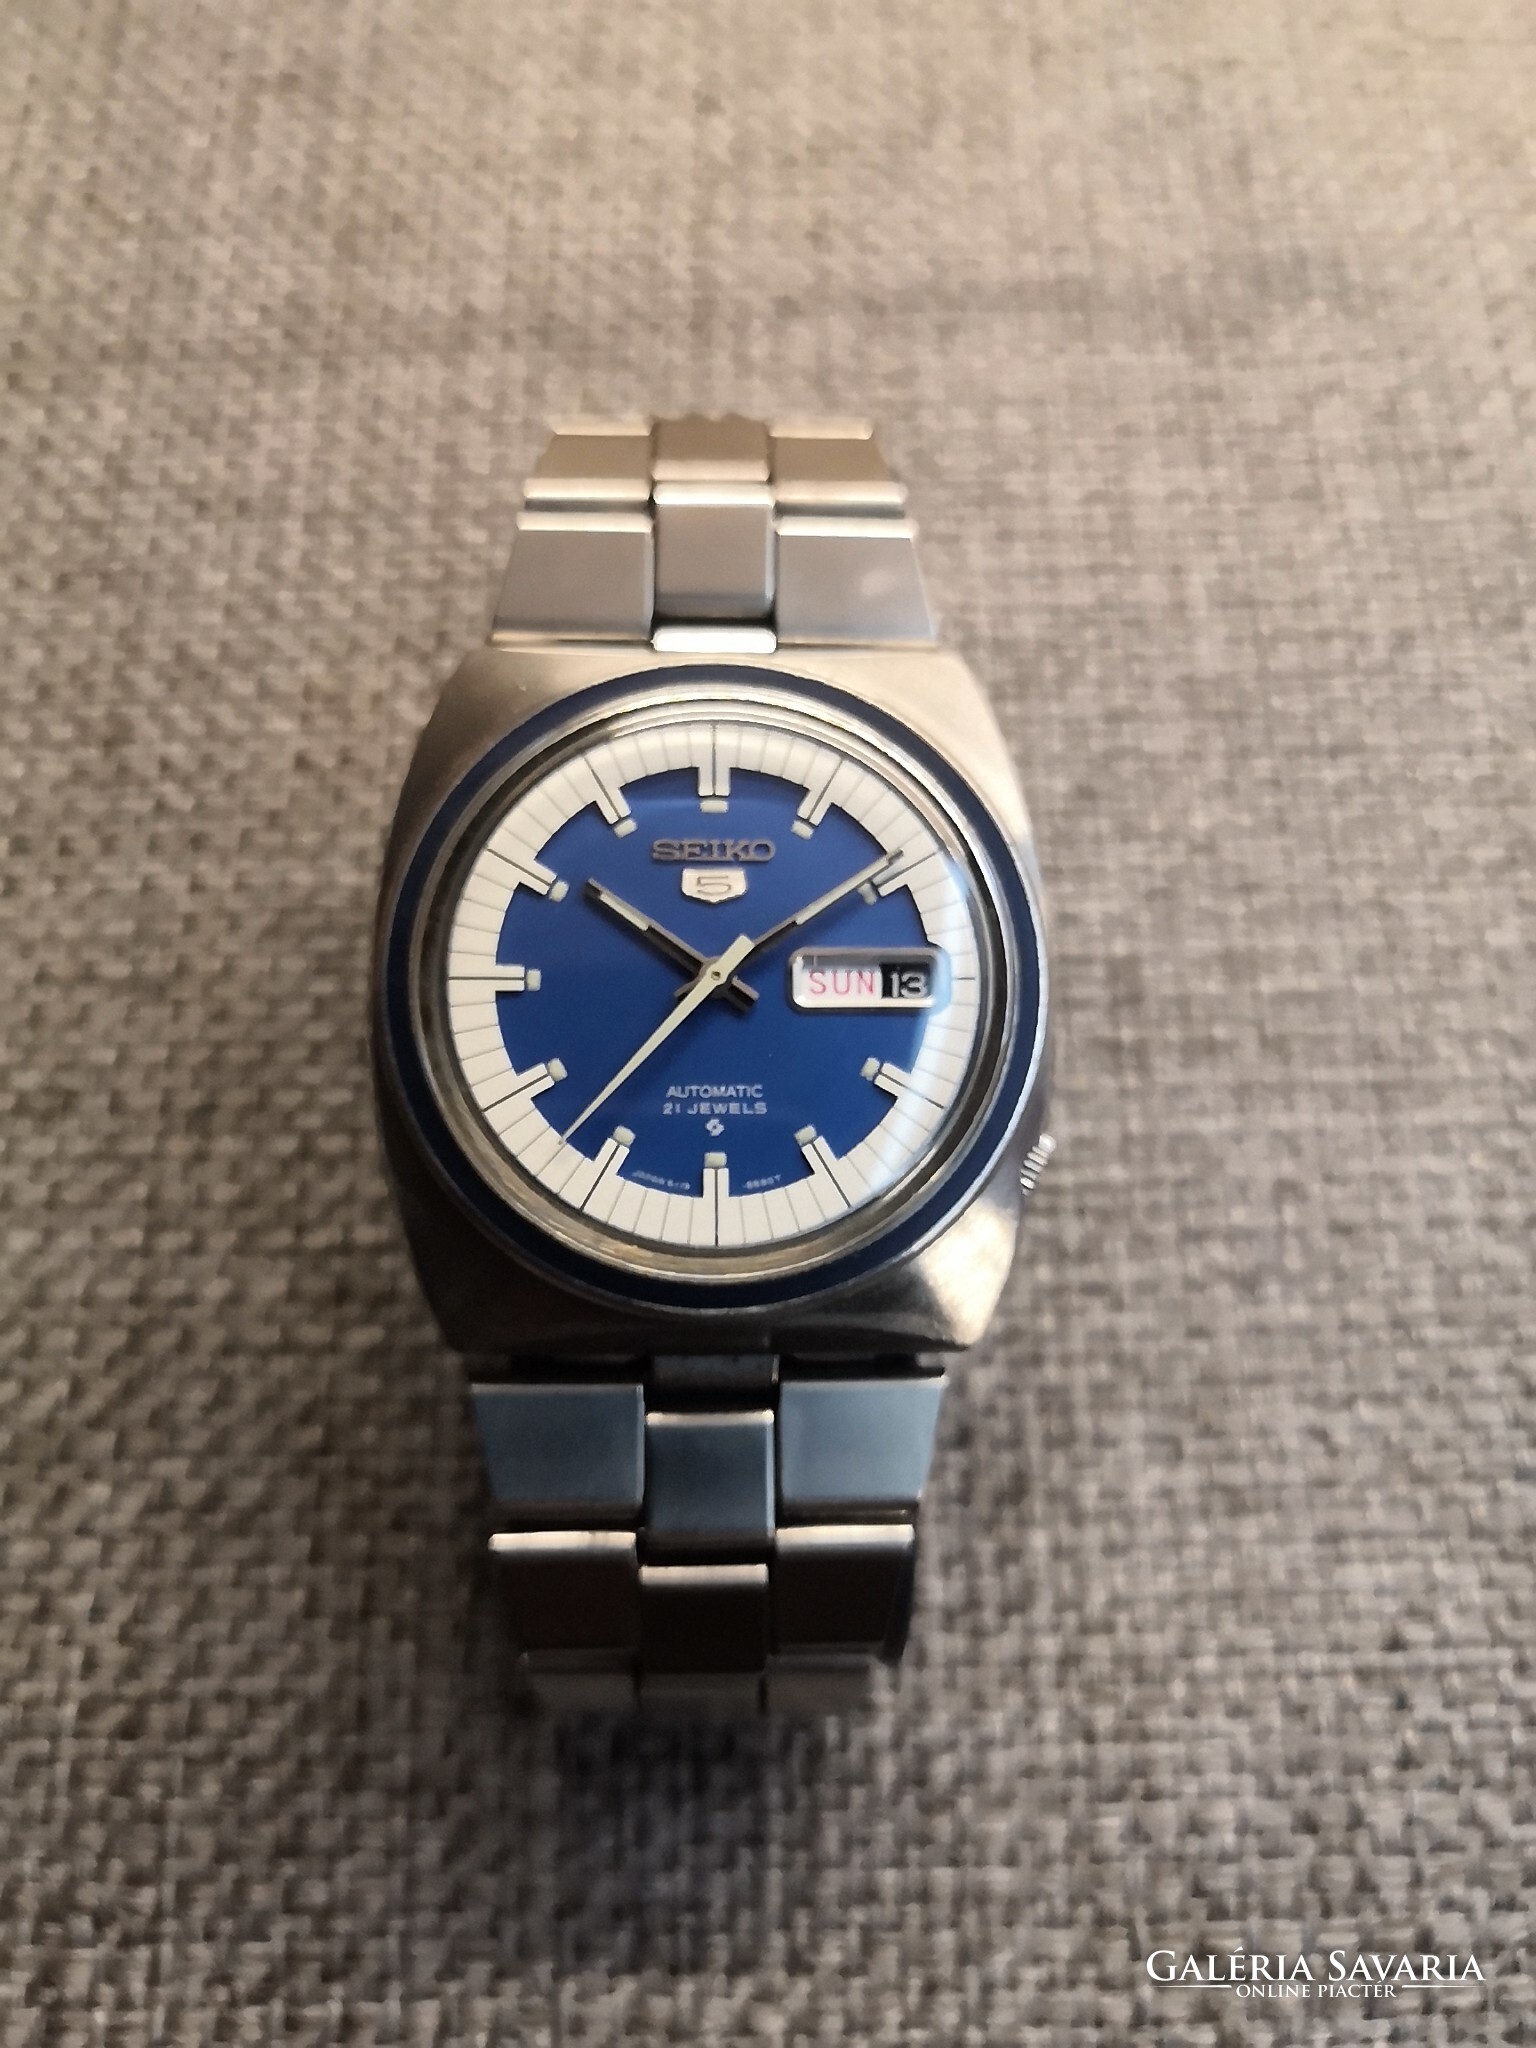 Seiko 5 (6119-8490) 1972 - Clocks & Watches | Galeria Savaria online  marketplace - Buy or sell on a credible, high quality platform.